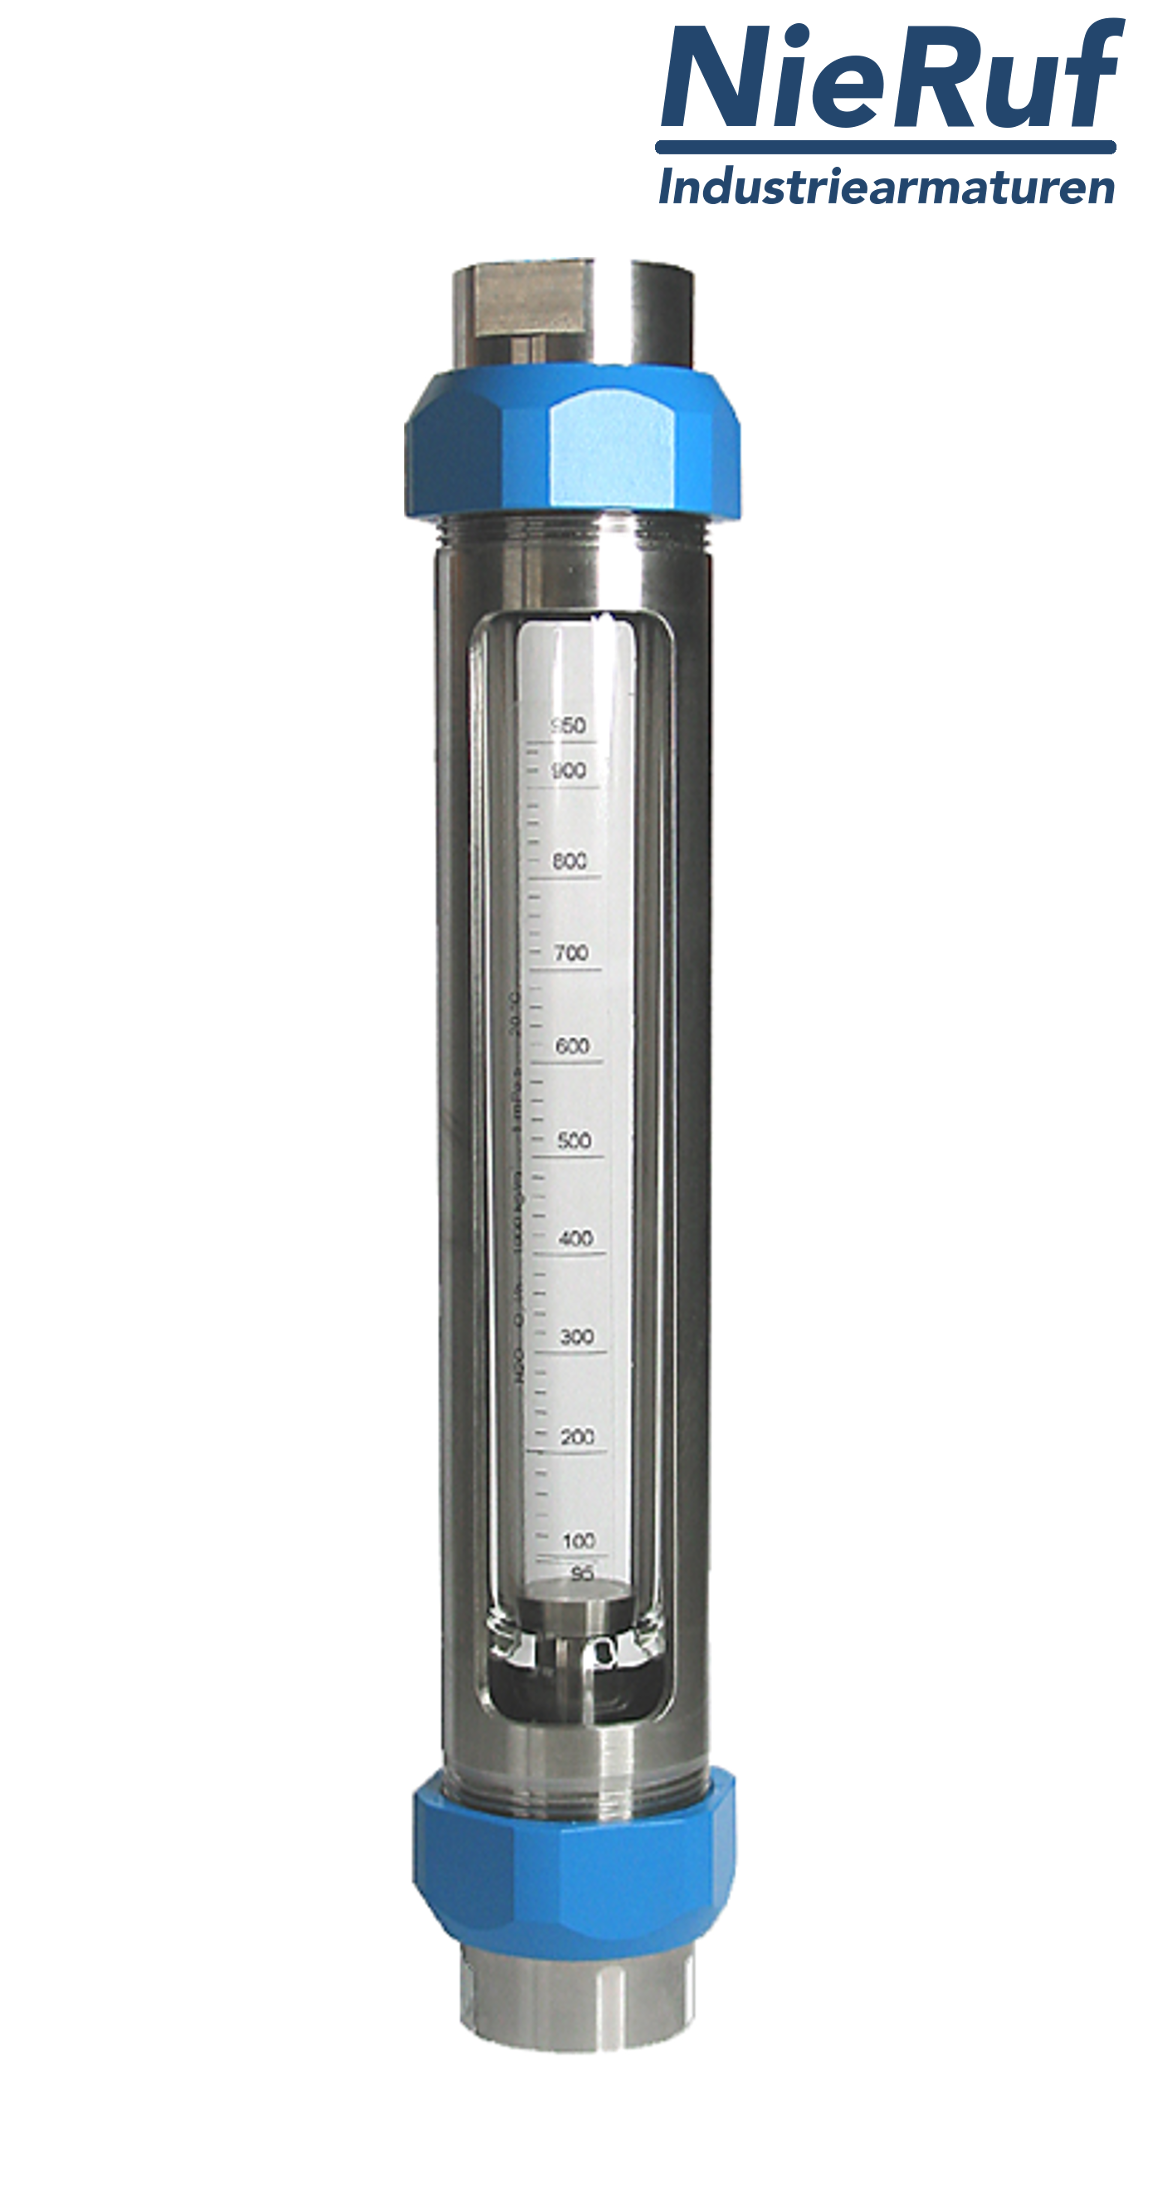 Variable area flowmeter stainless steel + borosilicate 3/4" inch 250.0 - 2500 l/h water EPDM